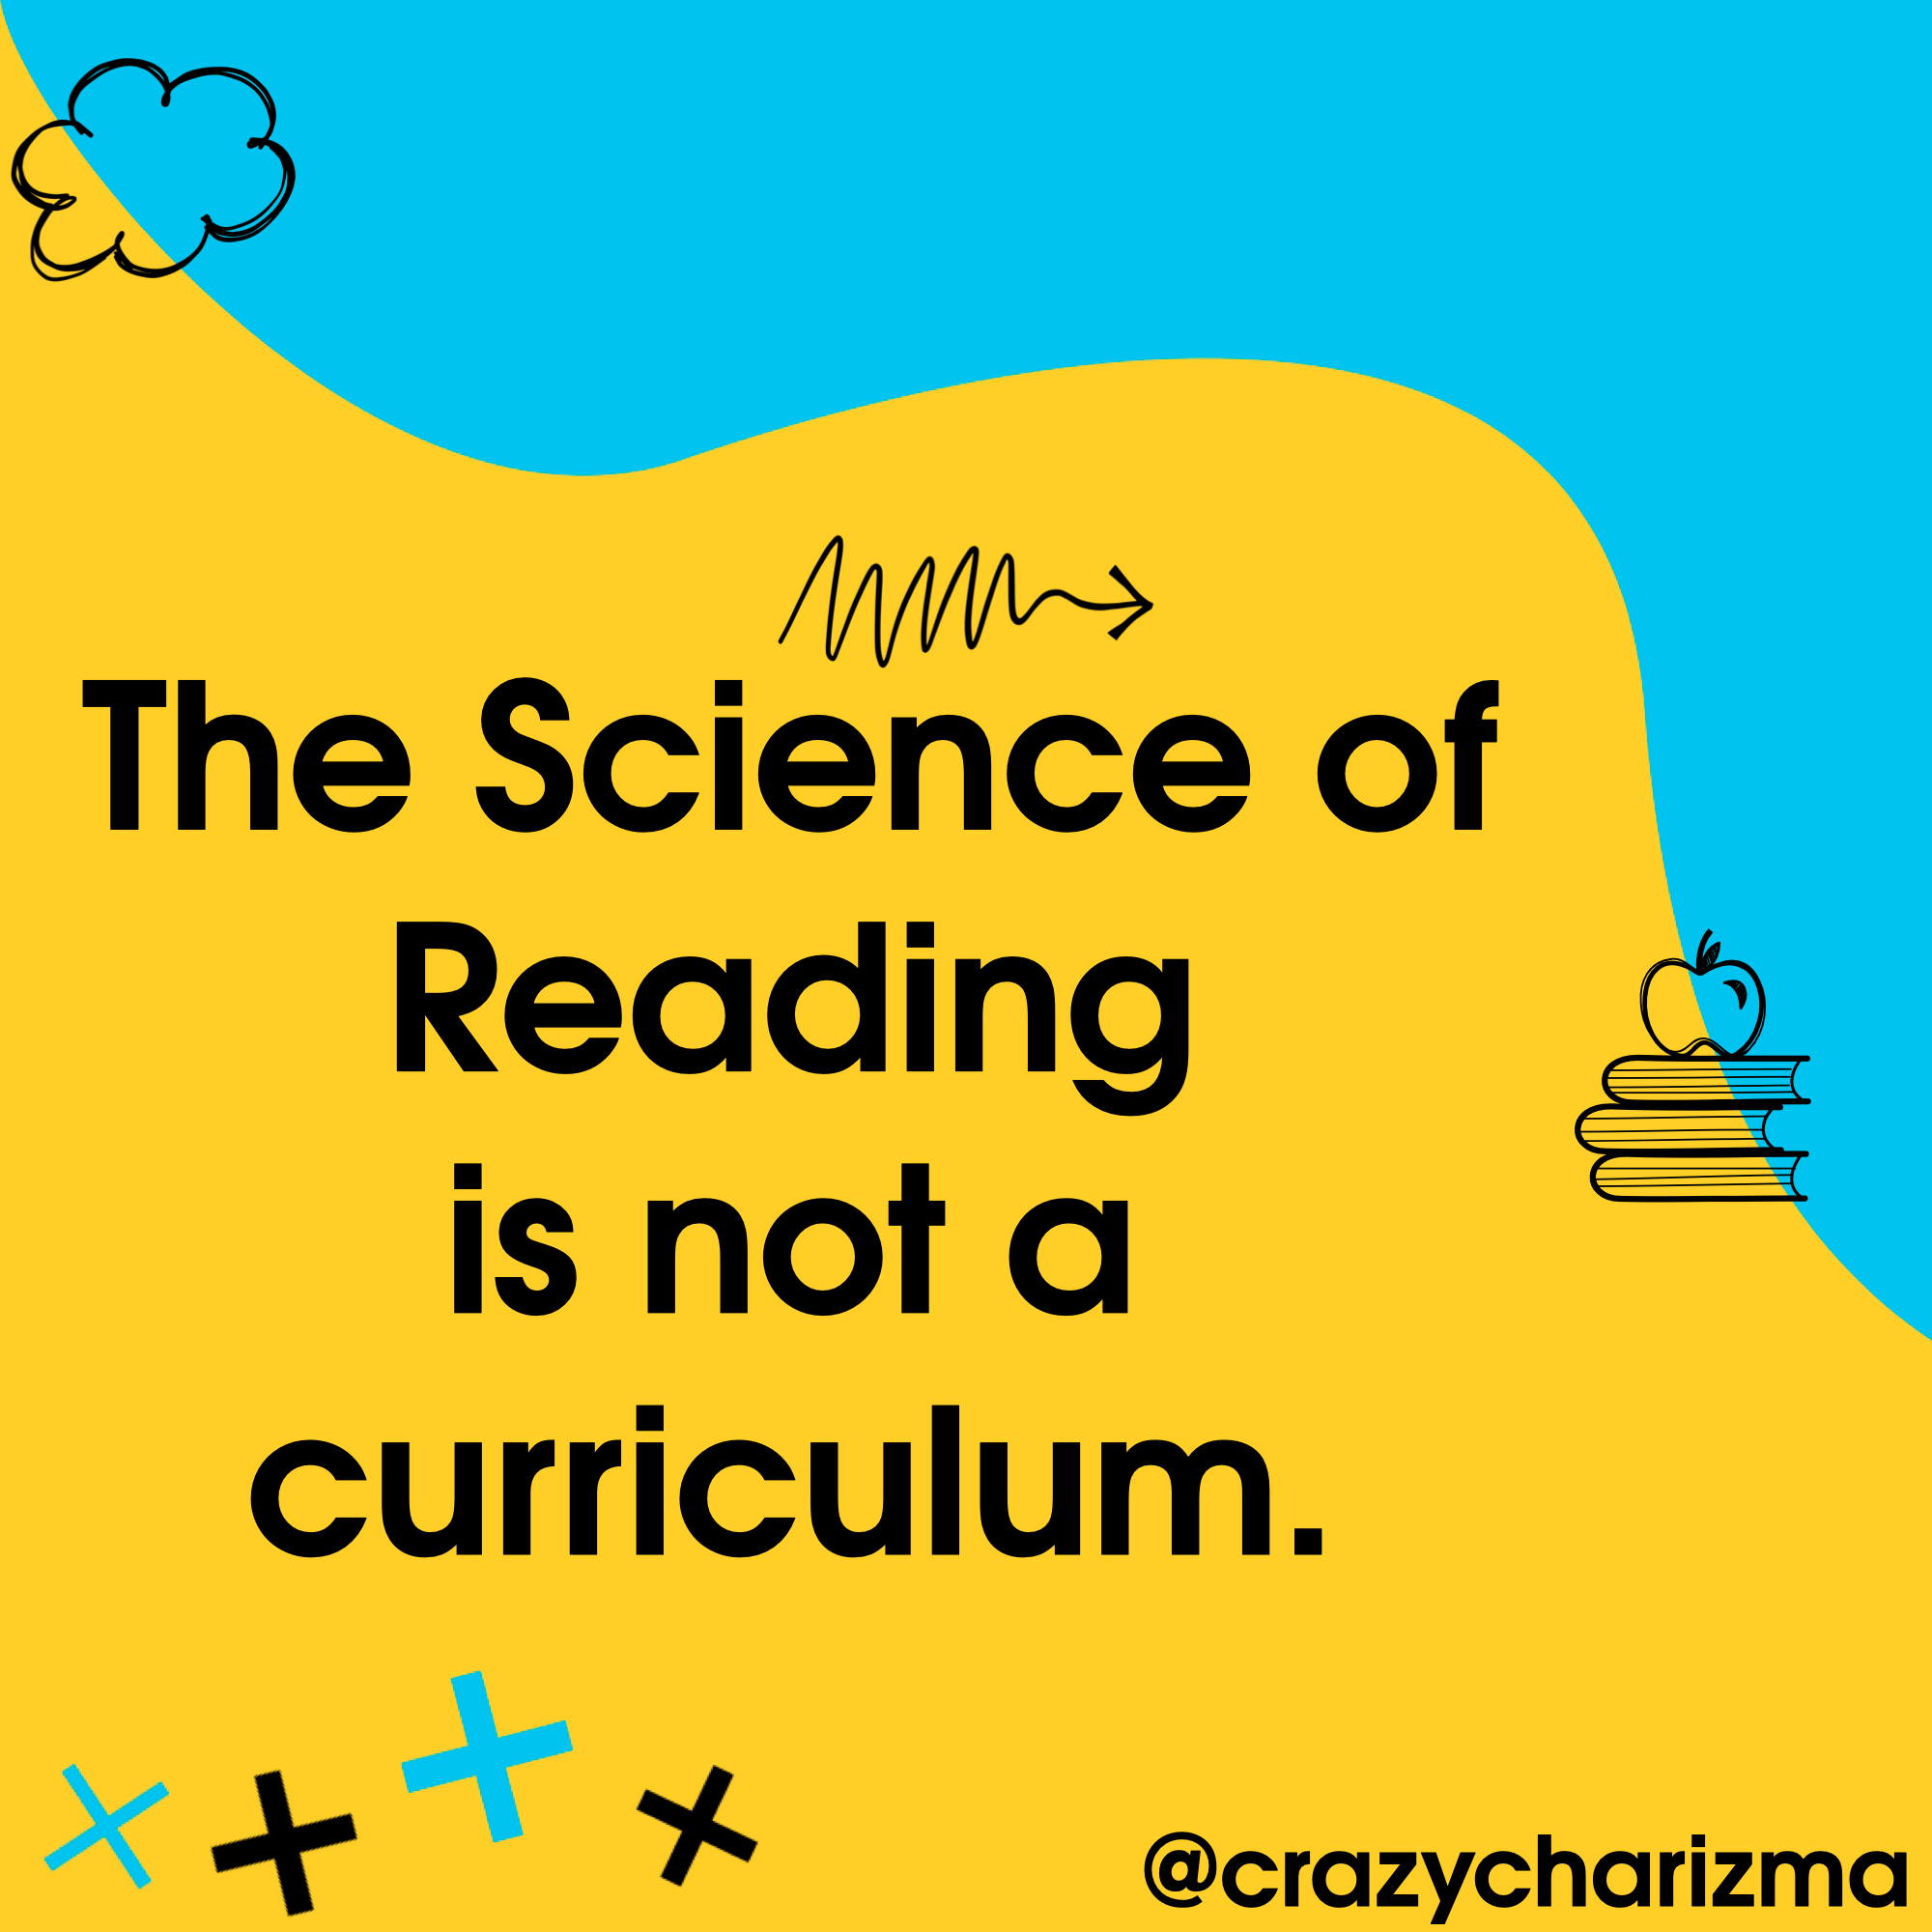 The Science of Reading is not a curriculum.